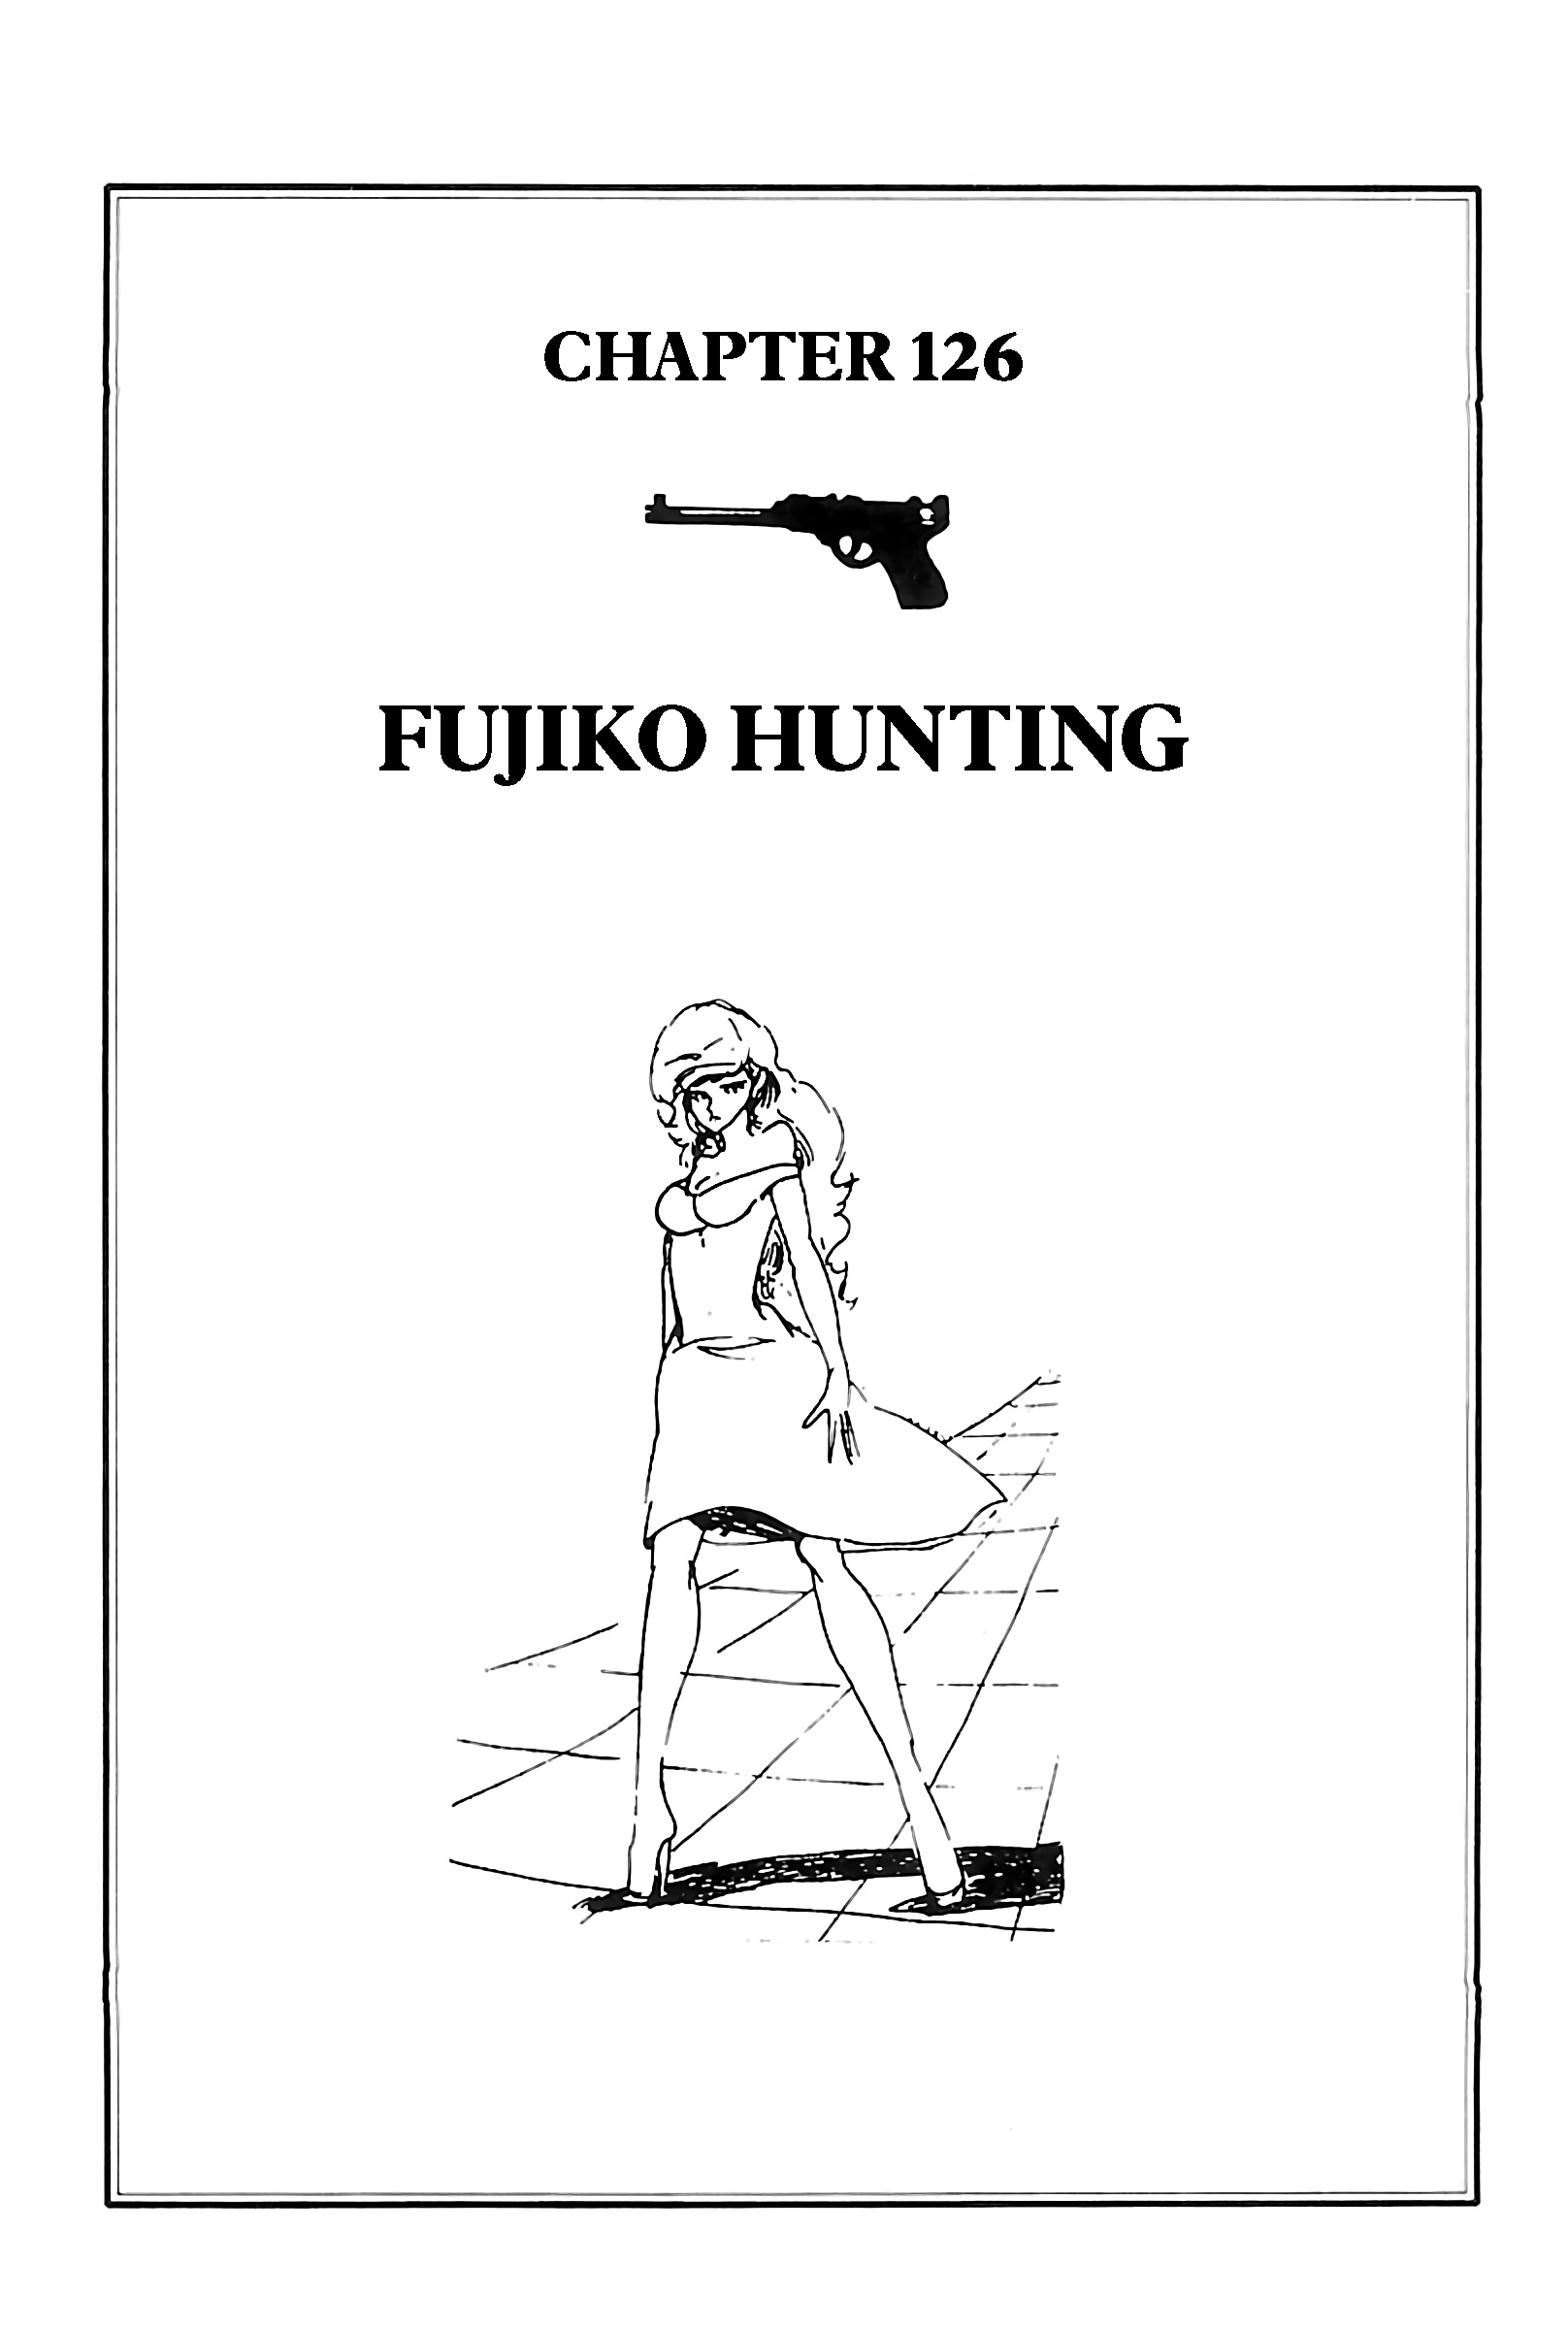 Lupin Iii: World’S Most Wanted Vol.11 Chapter 126: Fujiko Hunting - Picture 1